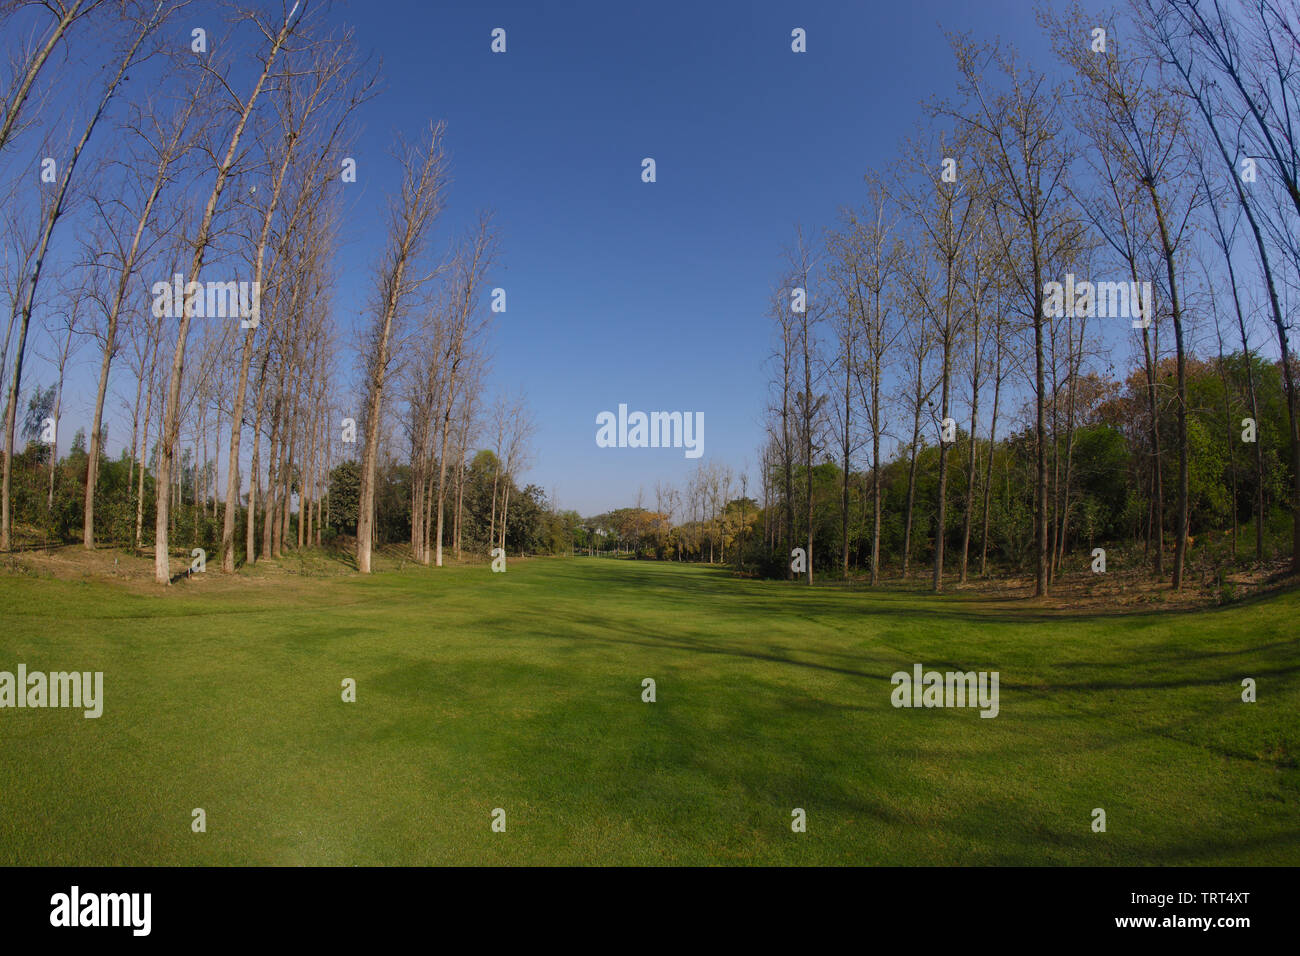 Trees in a golf course Stock Photo